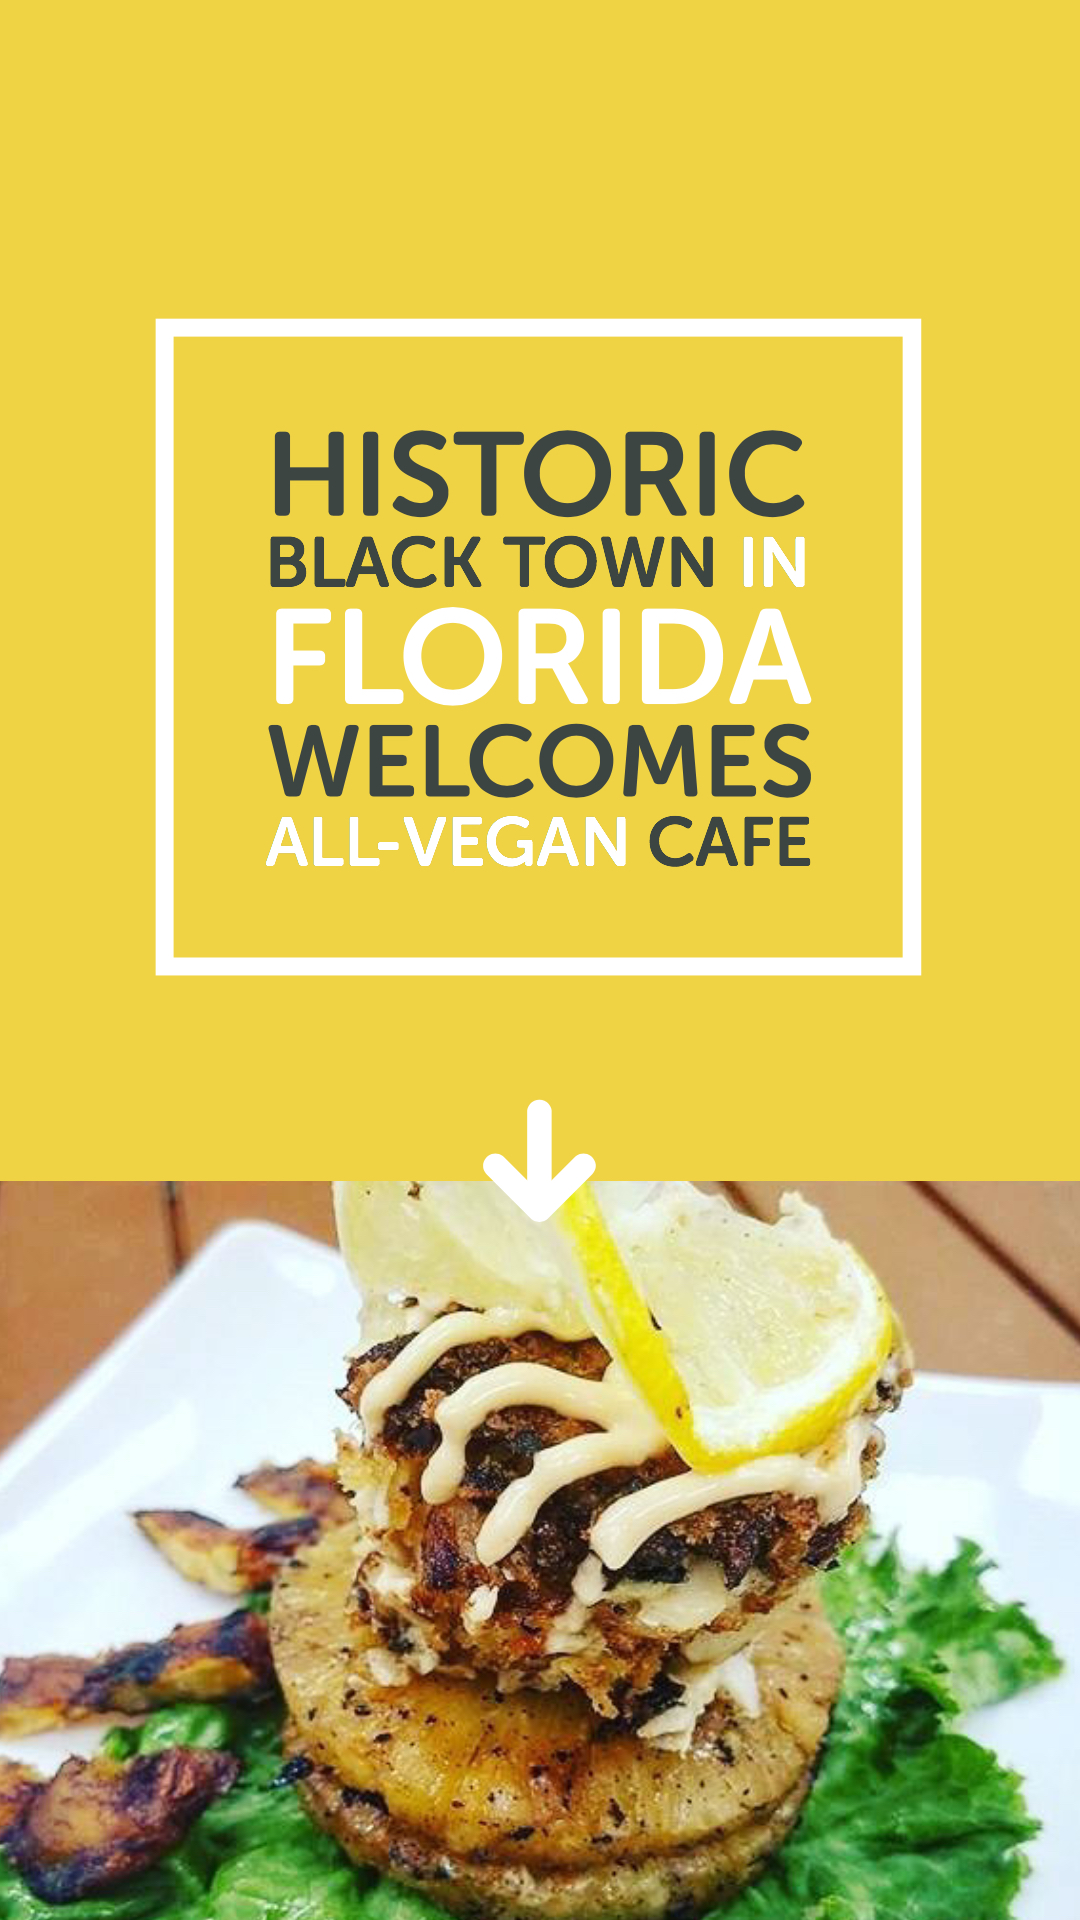 Historic Black Town in Florida Welcomes All-Vegan Cafe